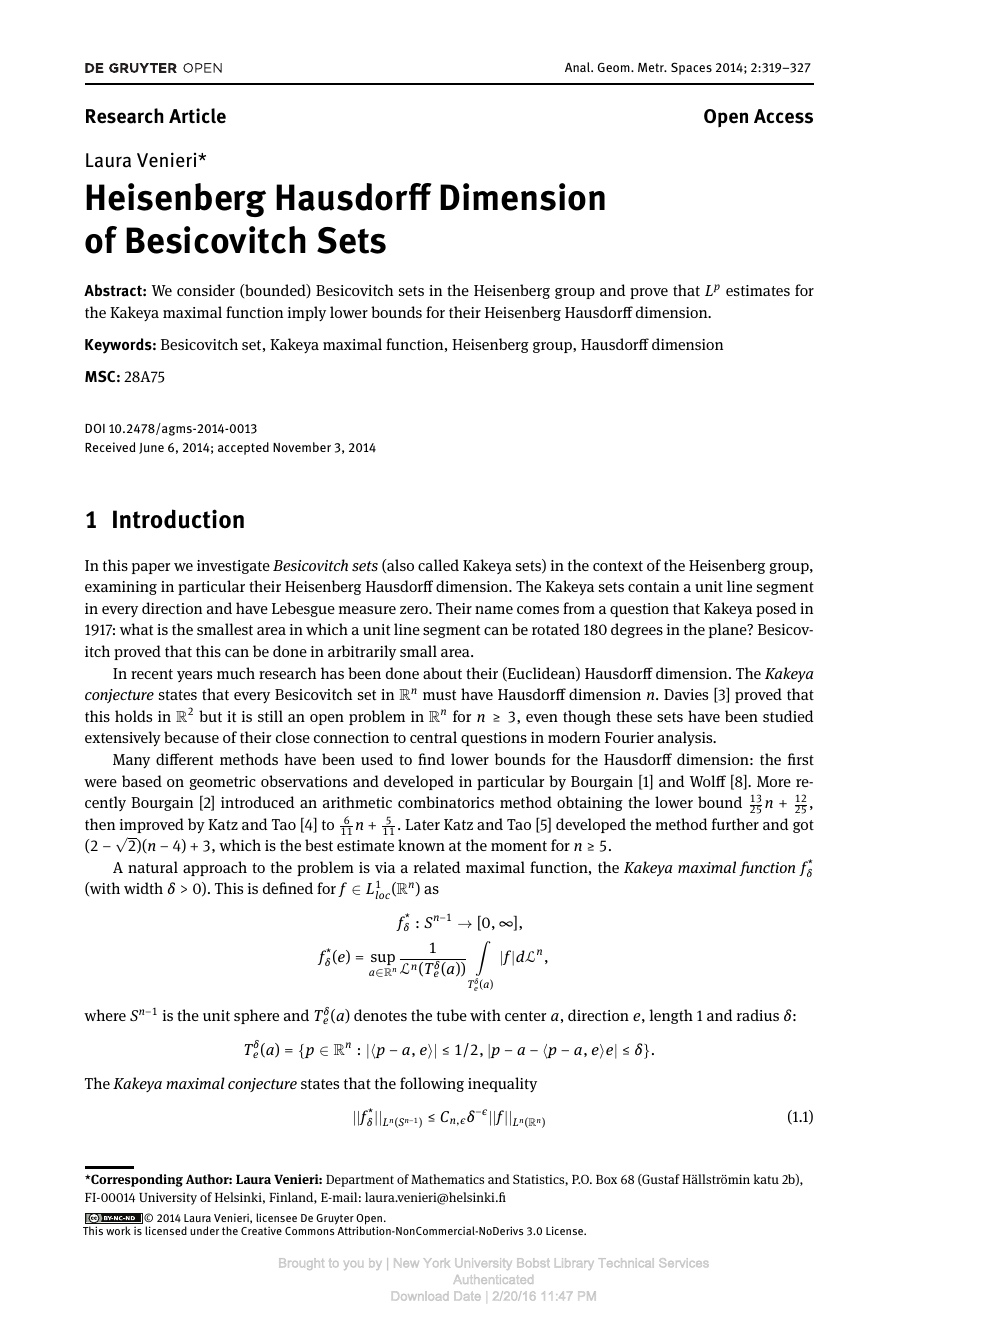 Heisenberg Hausdorff Dimension Of Besicovitch Sets Topic Of Research Paper In Mathematics Download Scholarly Article Pdf And Read For Free On Cyberleninka Open Science Hub